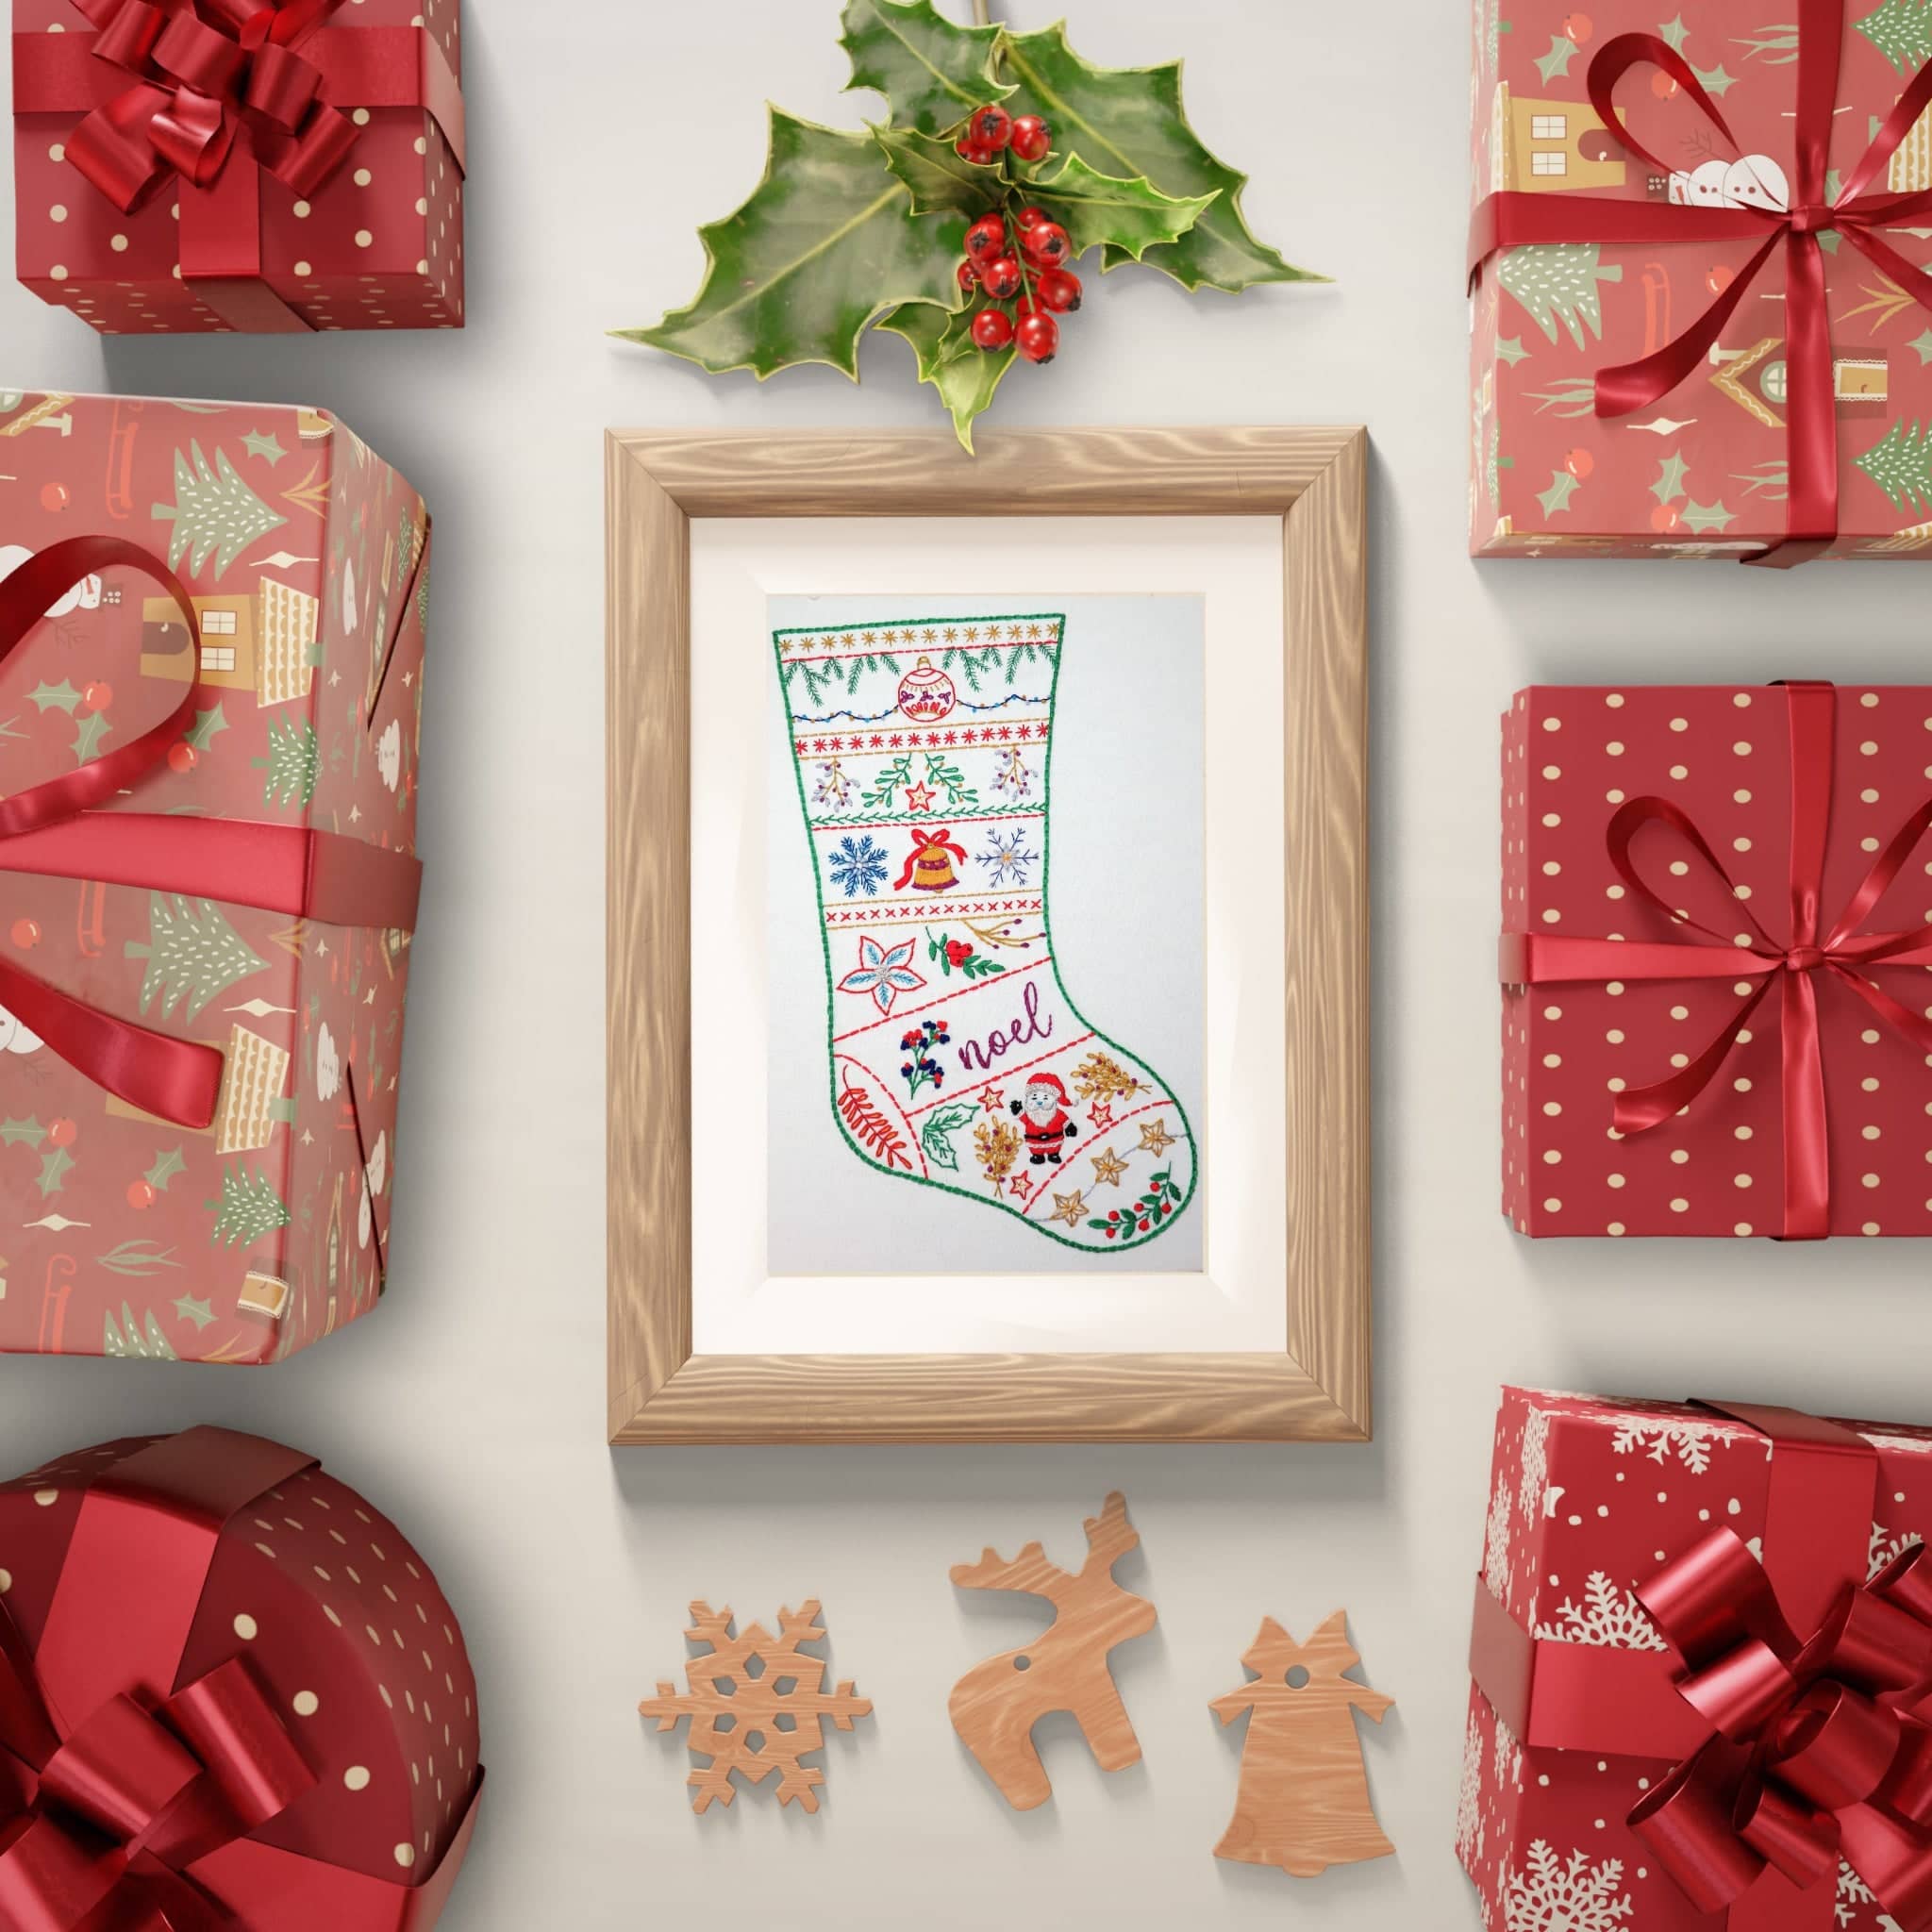 Christmas Stocking Hand Embroidery Kit , Hand Embroidery Kit , StitchDoodles , christmas, embroidery hoop kit, Embroidery Kit, embroidery kit for adults, embroidery kit fro beginners, embroidery kits for adults, embroidery kits for beginners, hand embroidery fabric, modern embroidery kits , StitchDoodles , shop.stitchdoodles.com